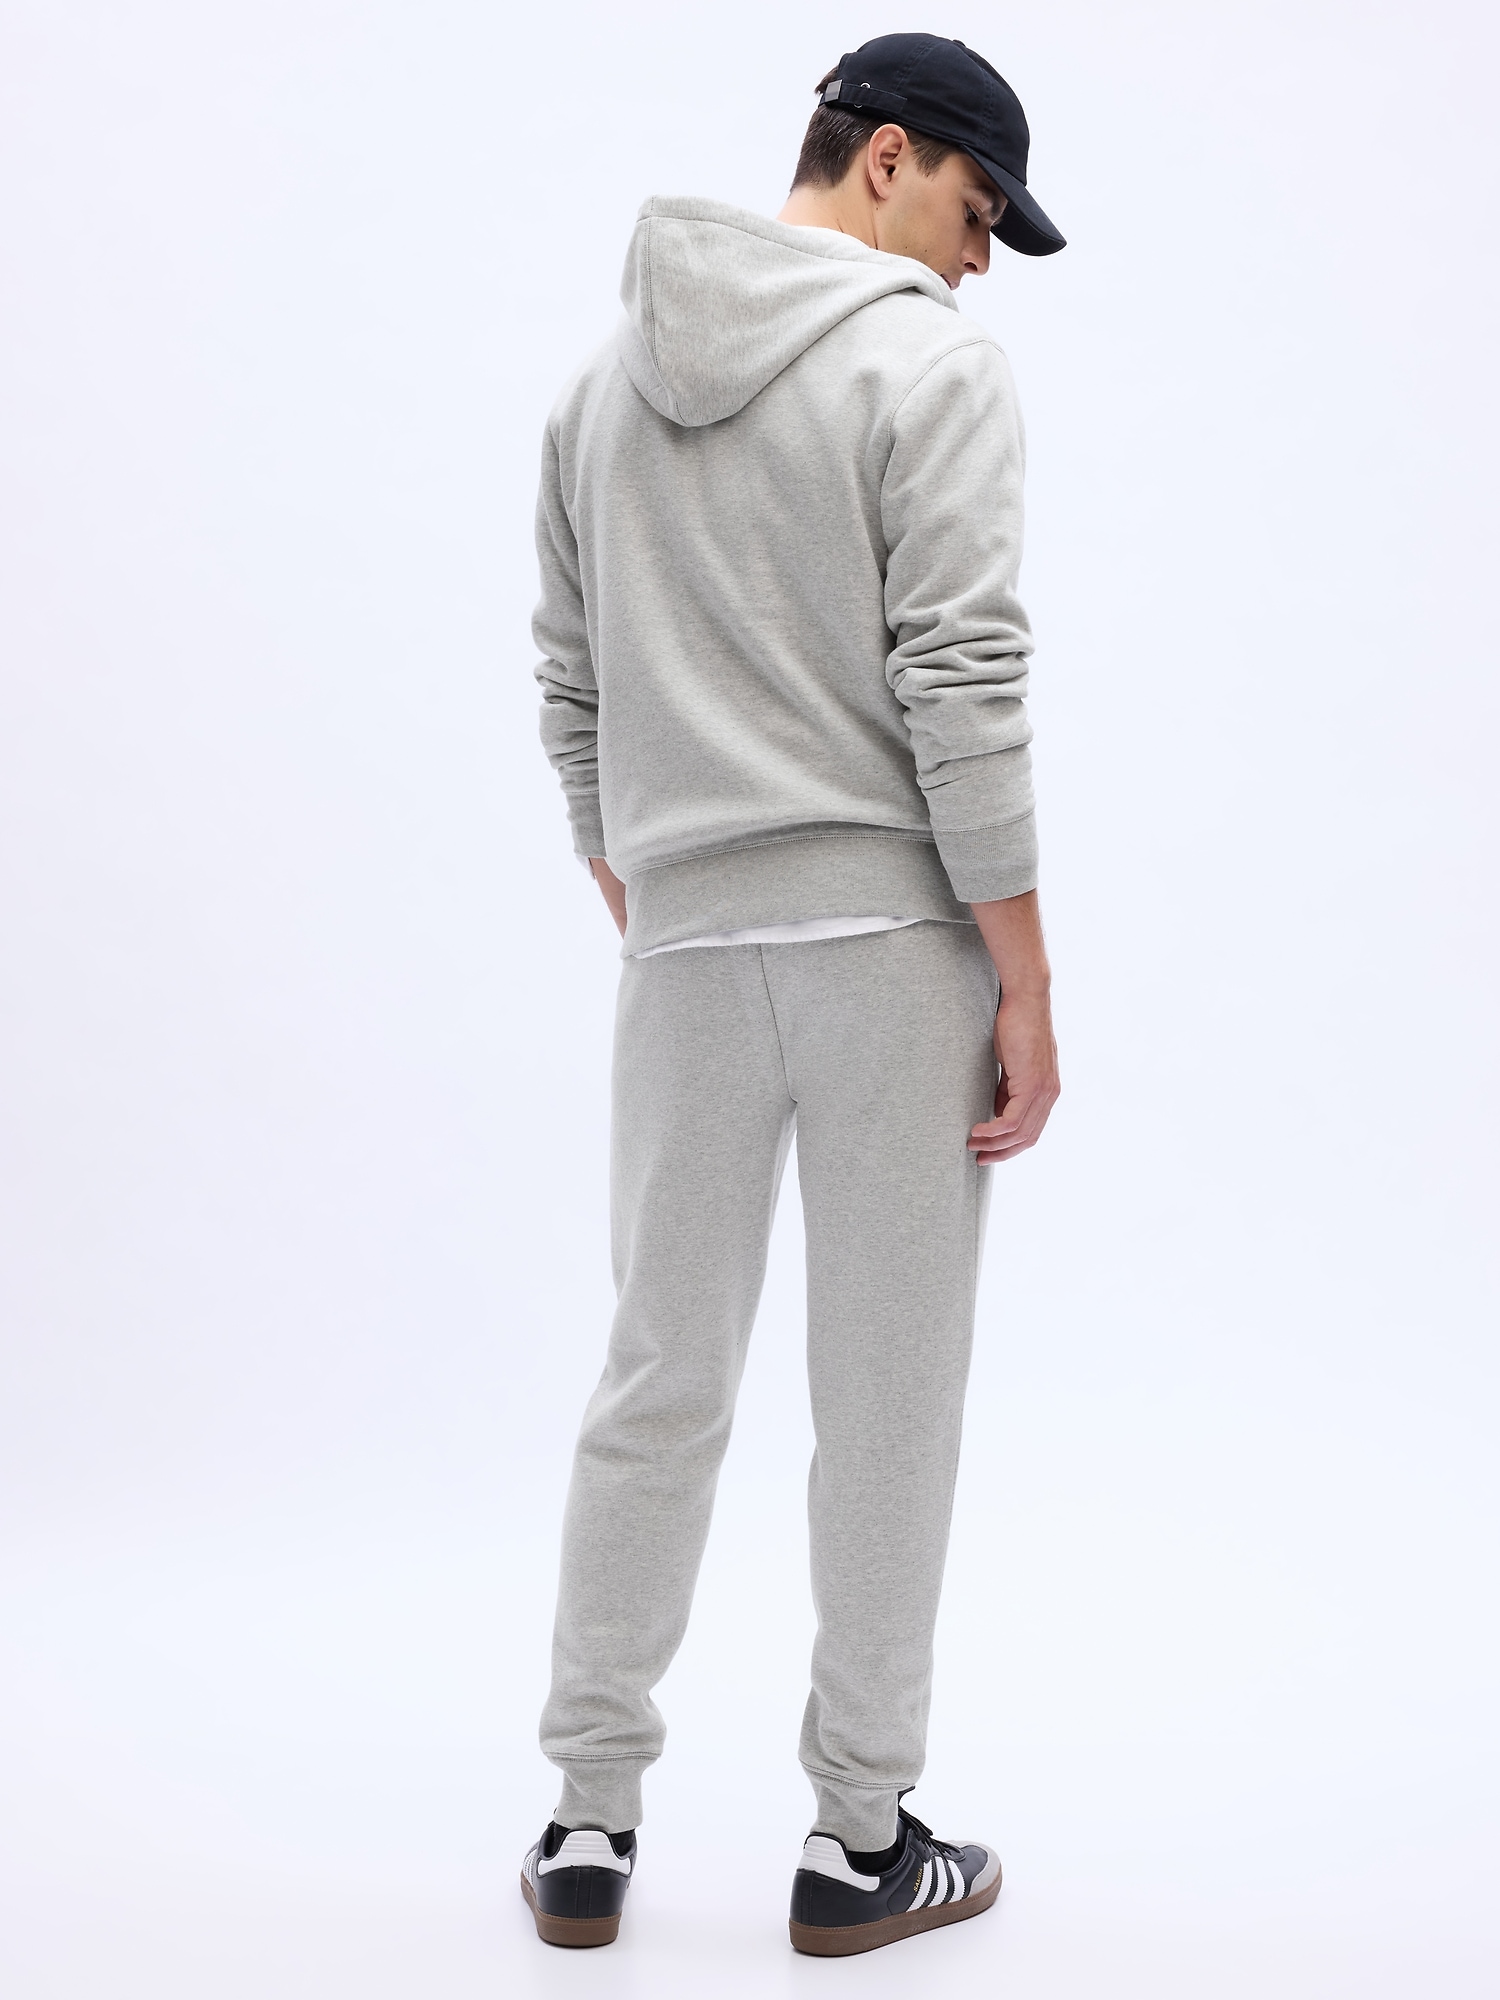 Gap Logo Joggers In Fleece - Best Prices at Dealmoon